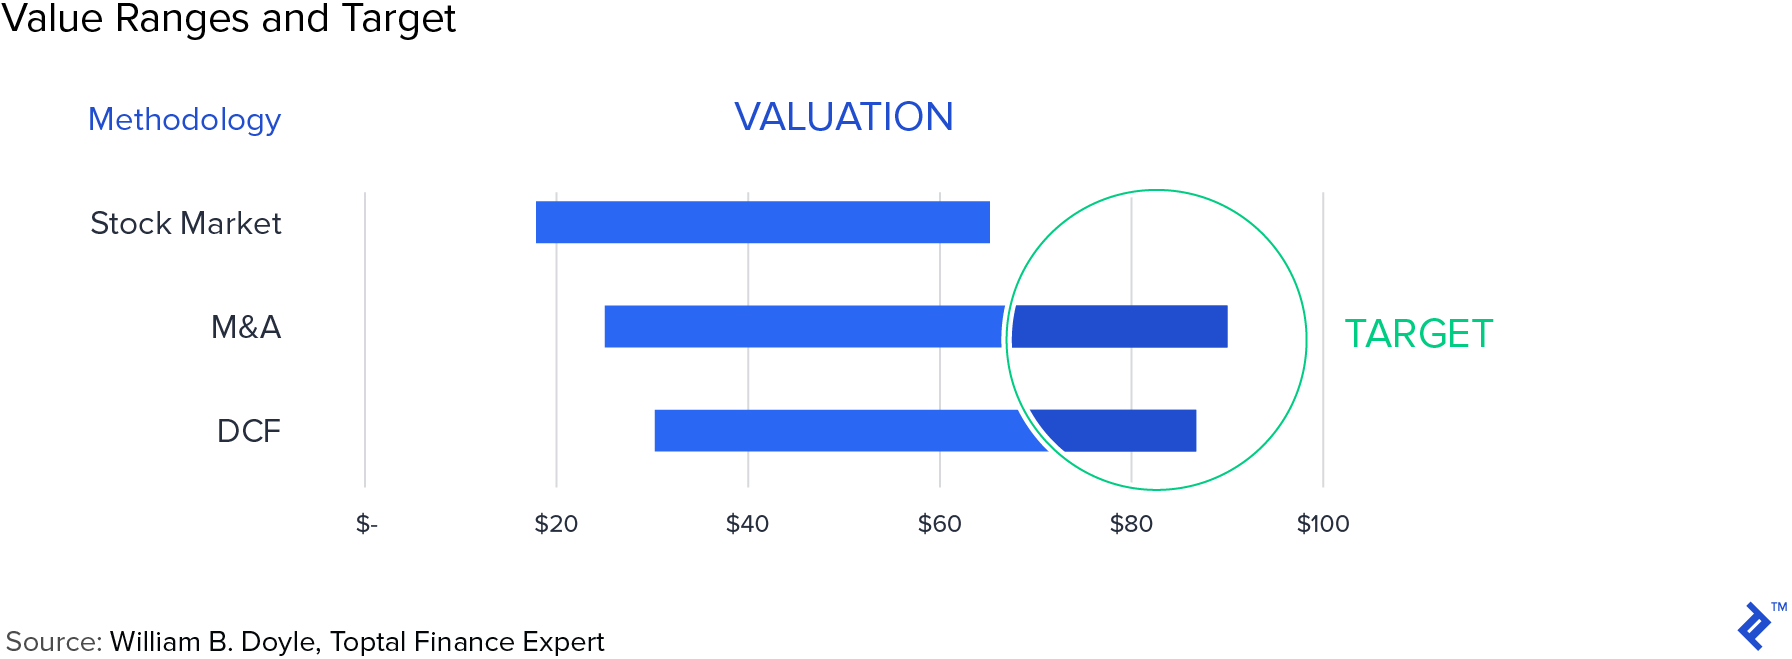 Value ranges and target